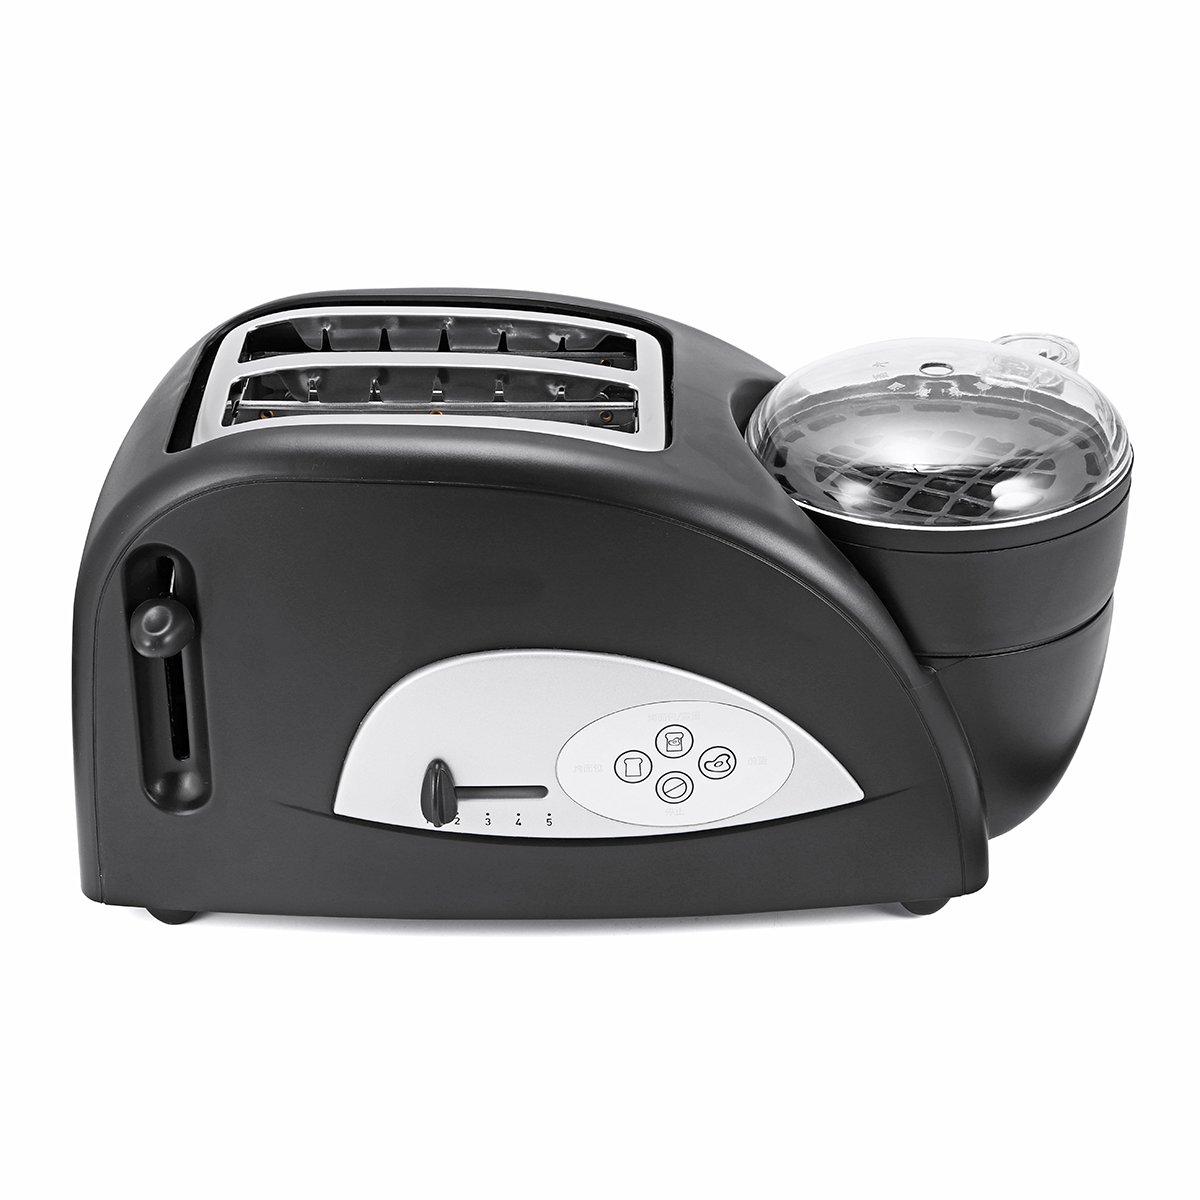 

2 In 1 Stainless Toaster and Egg Cooker Breakfast Wide Slot Toaster Kitchen Oven Machine